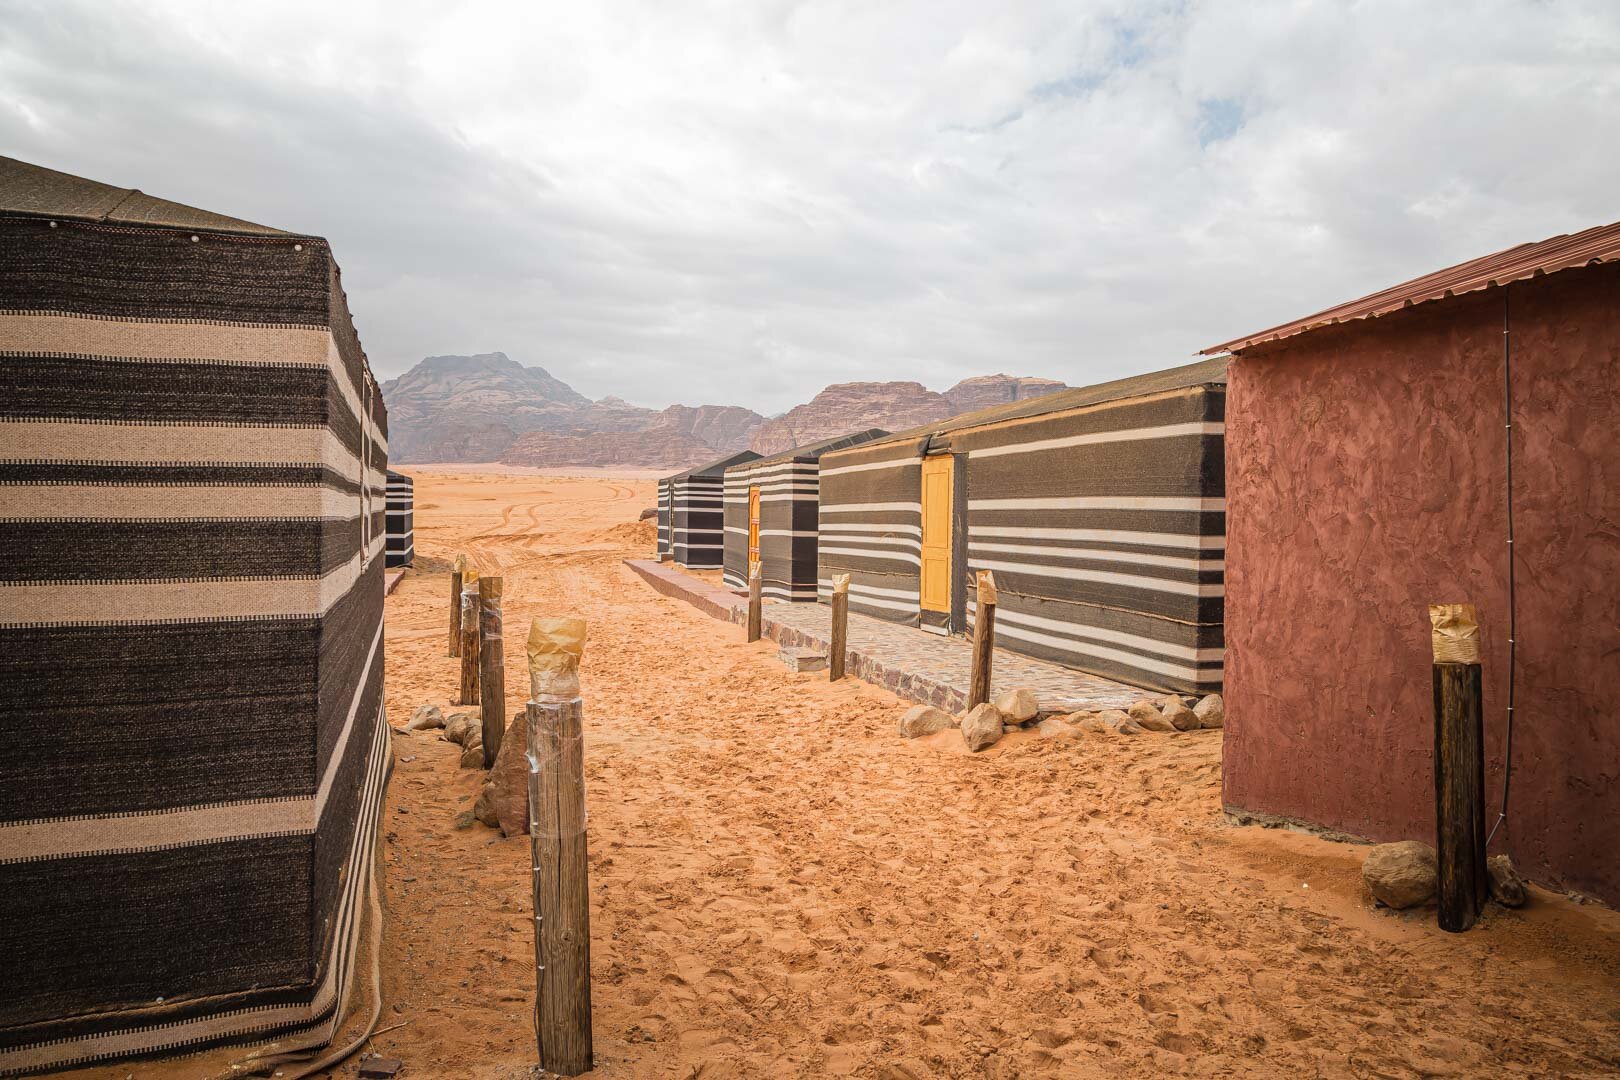 Landscape Photograph of the Exit of the Base Camp in Wadi Rum Jordan by Jordan Photographer Rashad Anabtawi